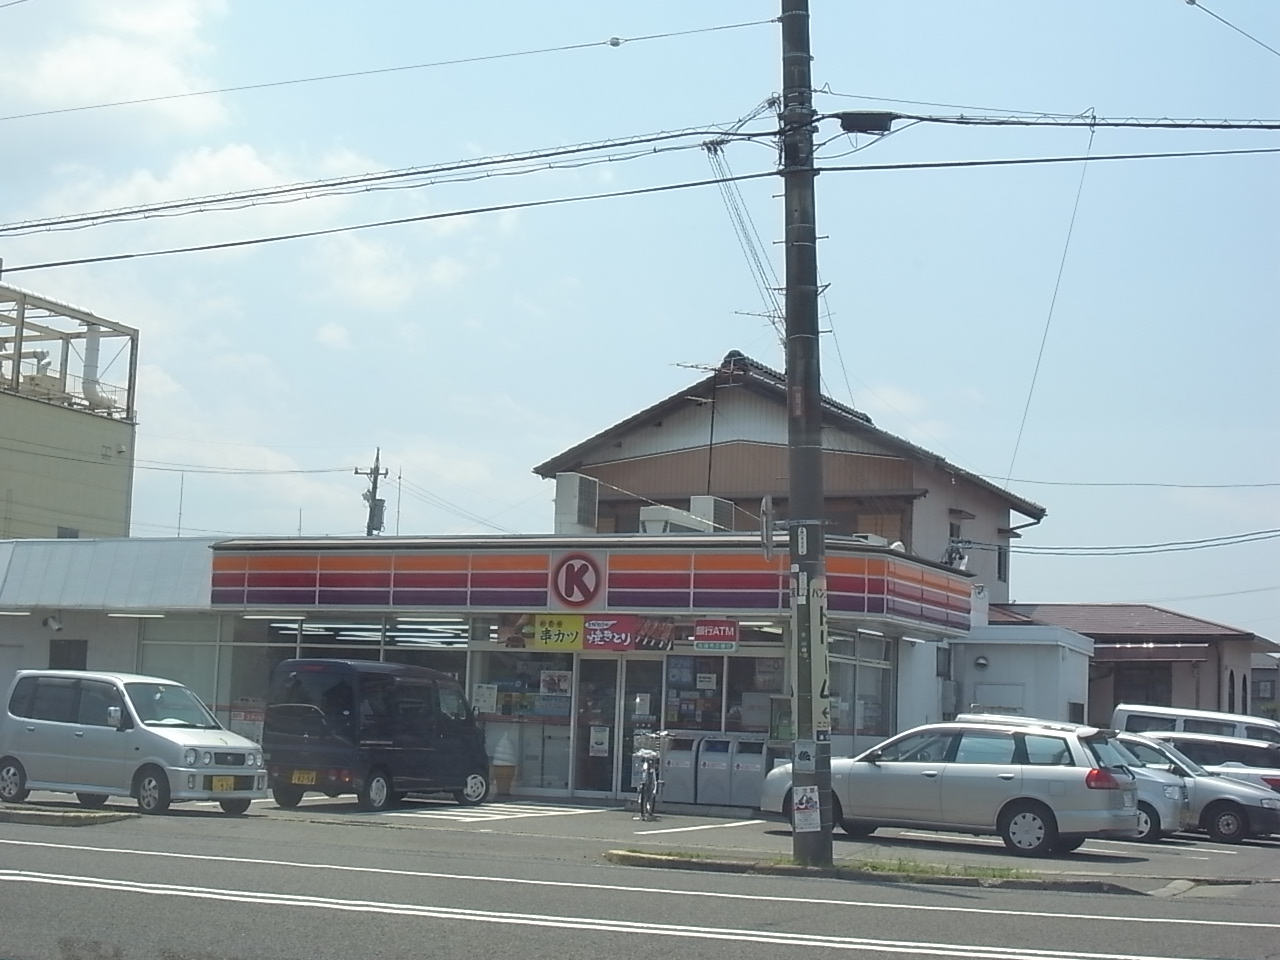 Convenience store. Circle K this now shop 492m up (convenience store)